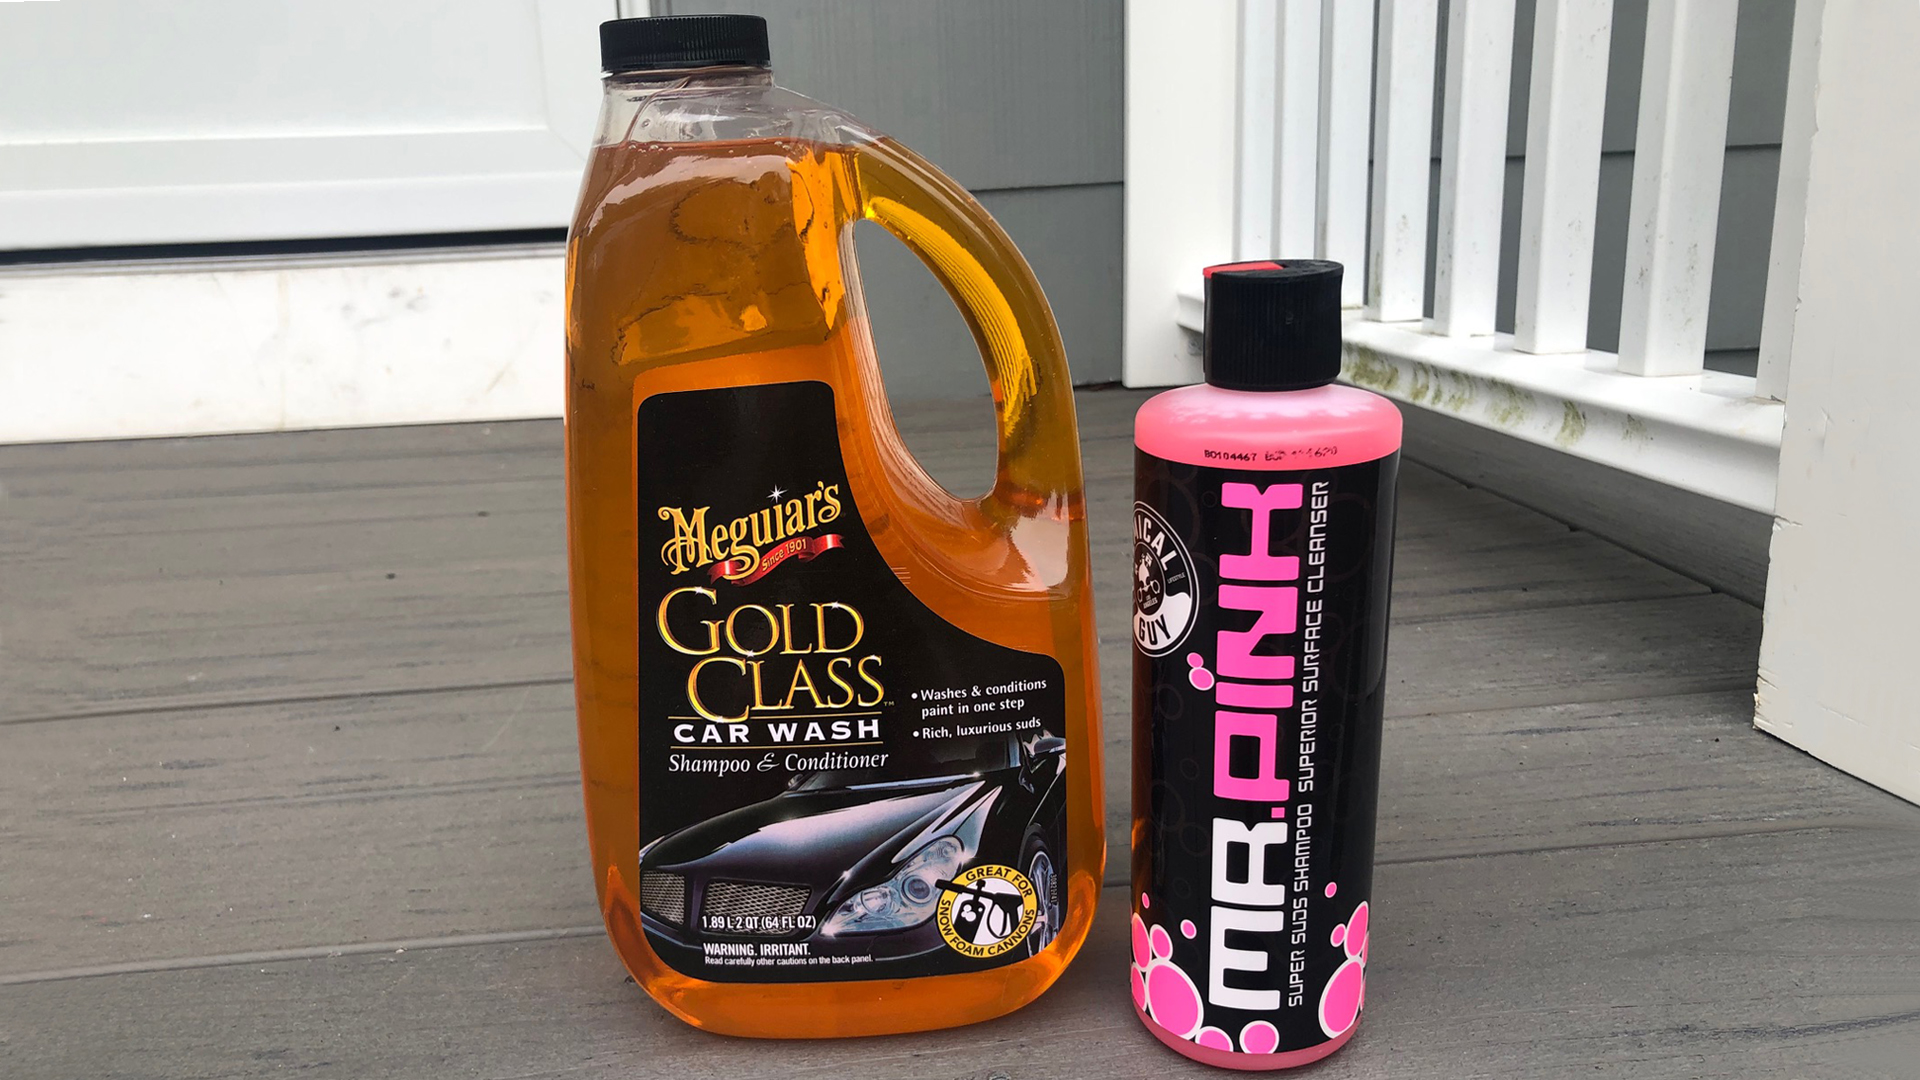 Meguiars Interior Detailing Product (How Good Is It?) 